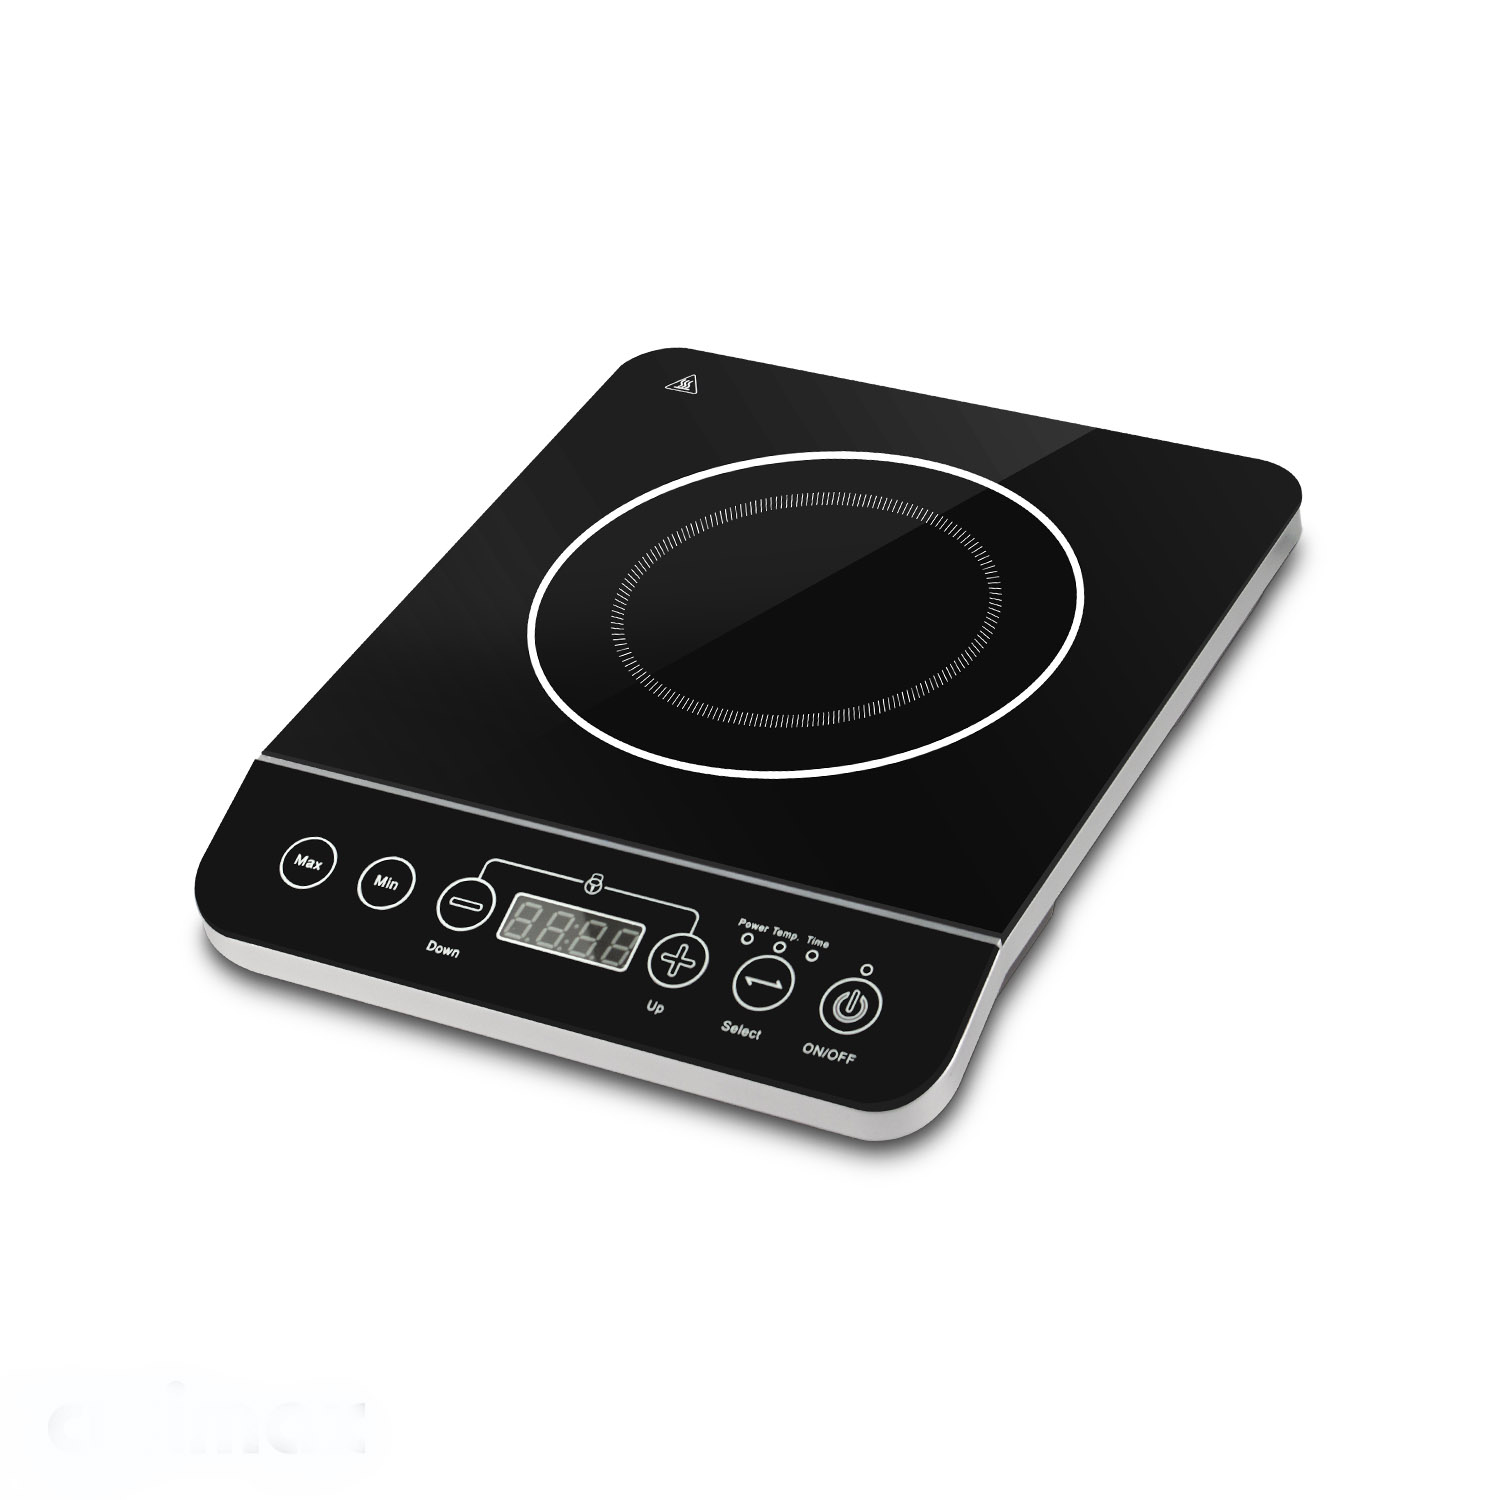 Kaiser induction cooker HC 93691 IS, electric cooker 90 cm induction hob  self-cleaning buy » IB-Electronics in Switzerland